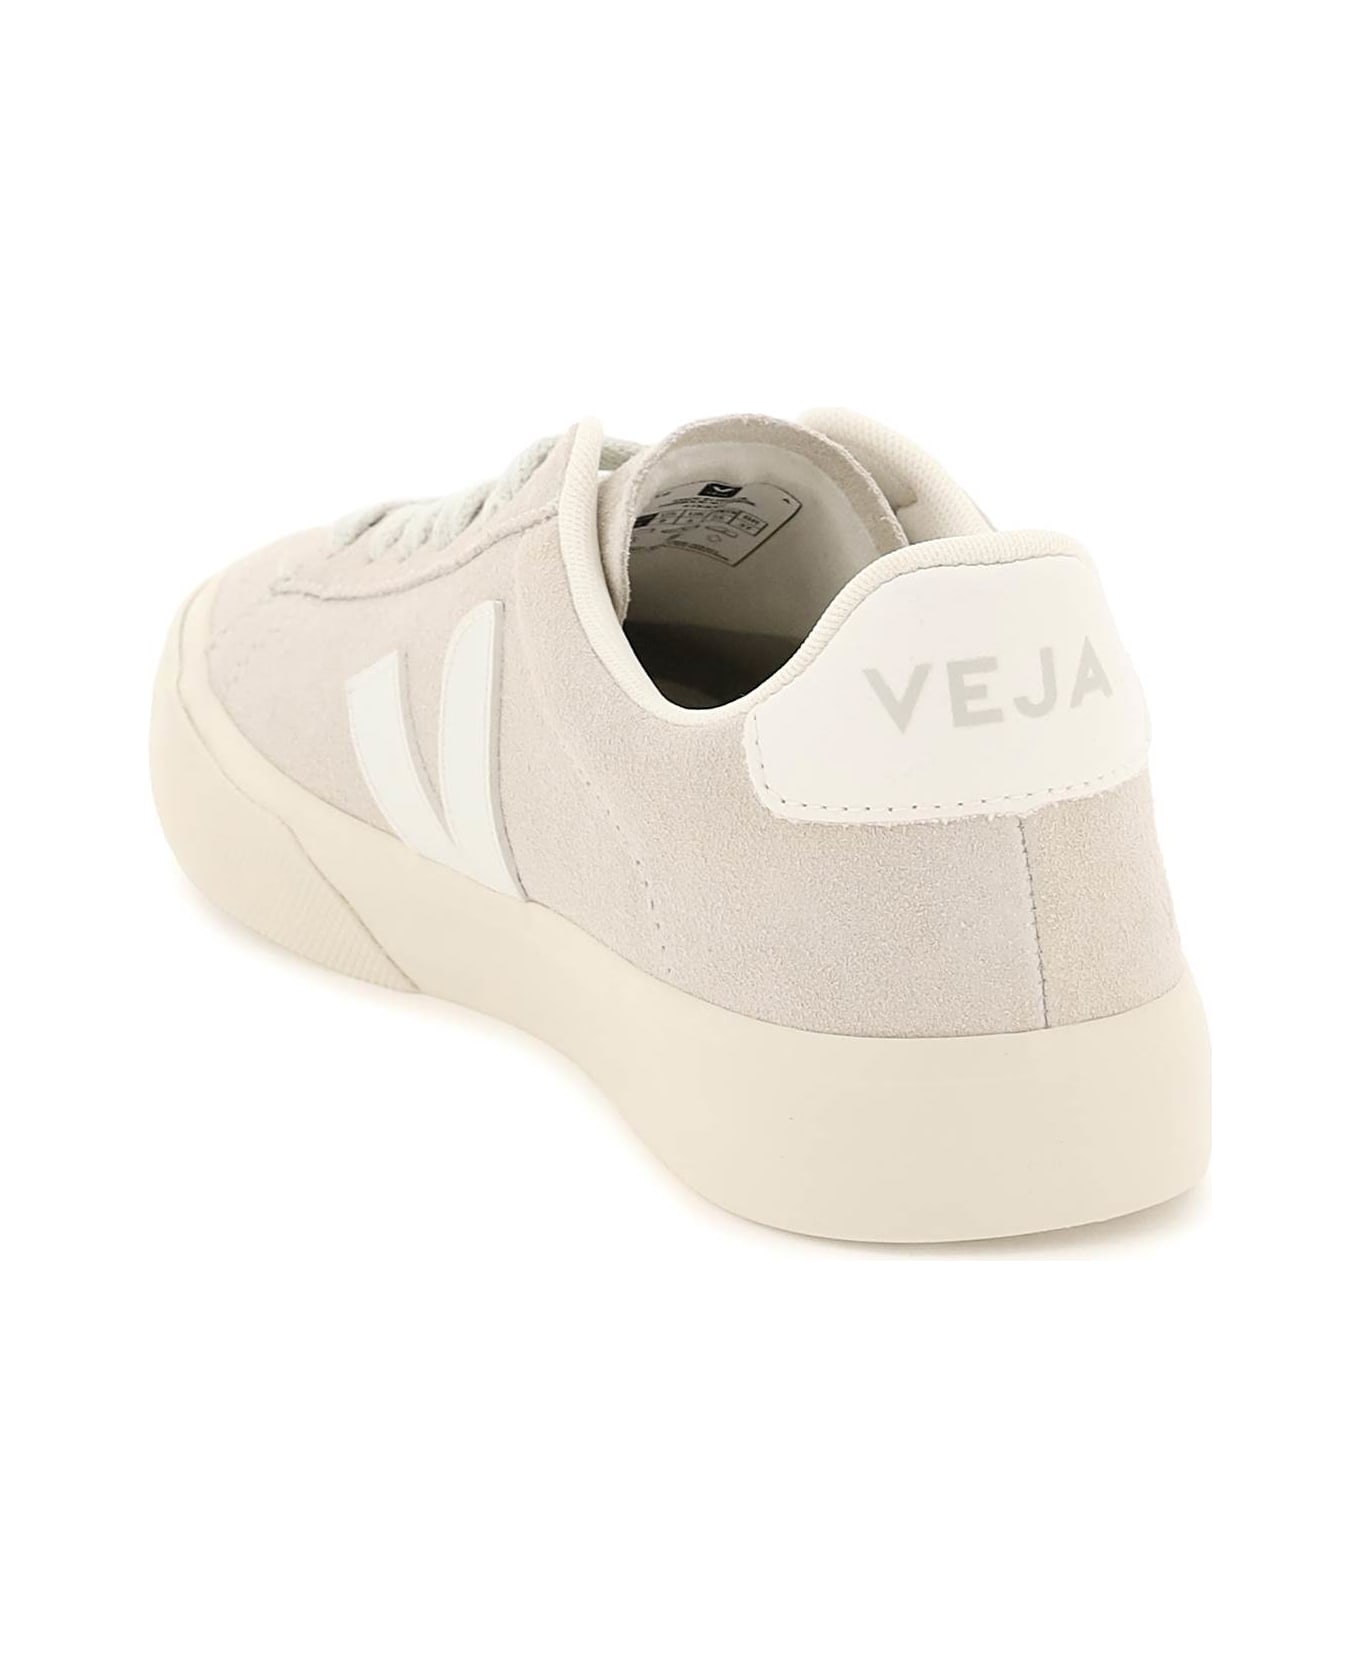 Veja Chromefree Leather Campo Sneakers - NATURAL WHITE (Grey) スニーカー